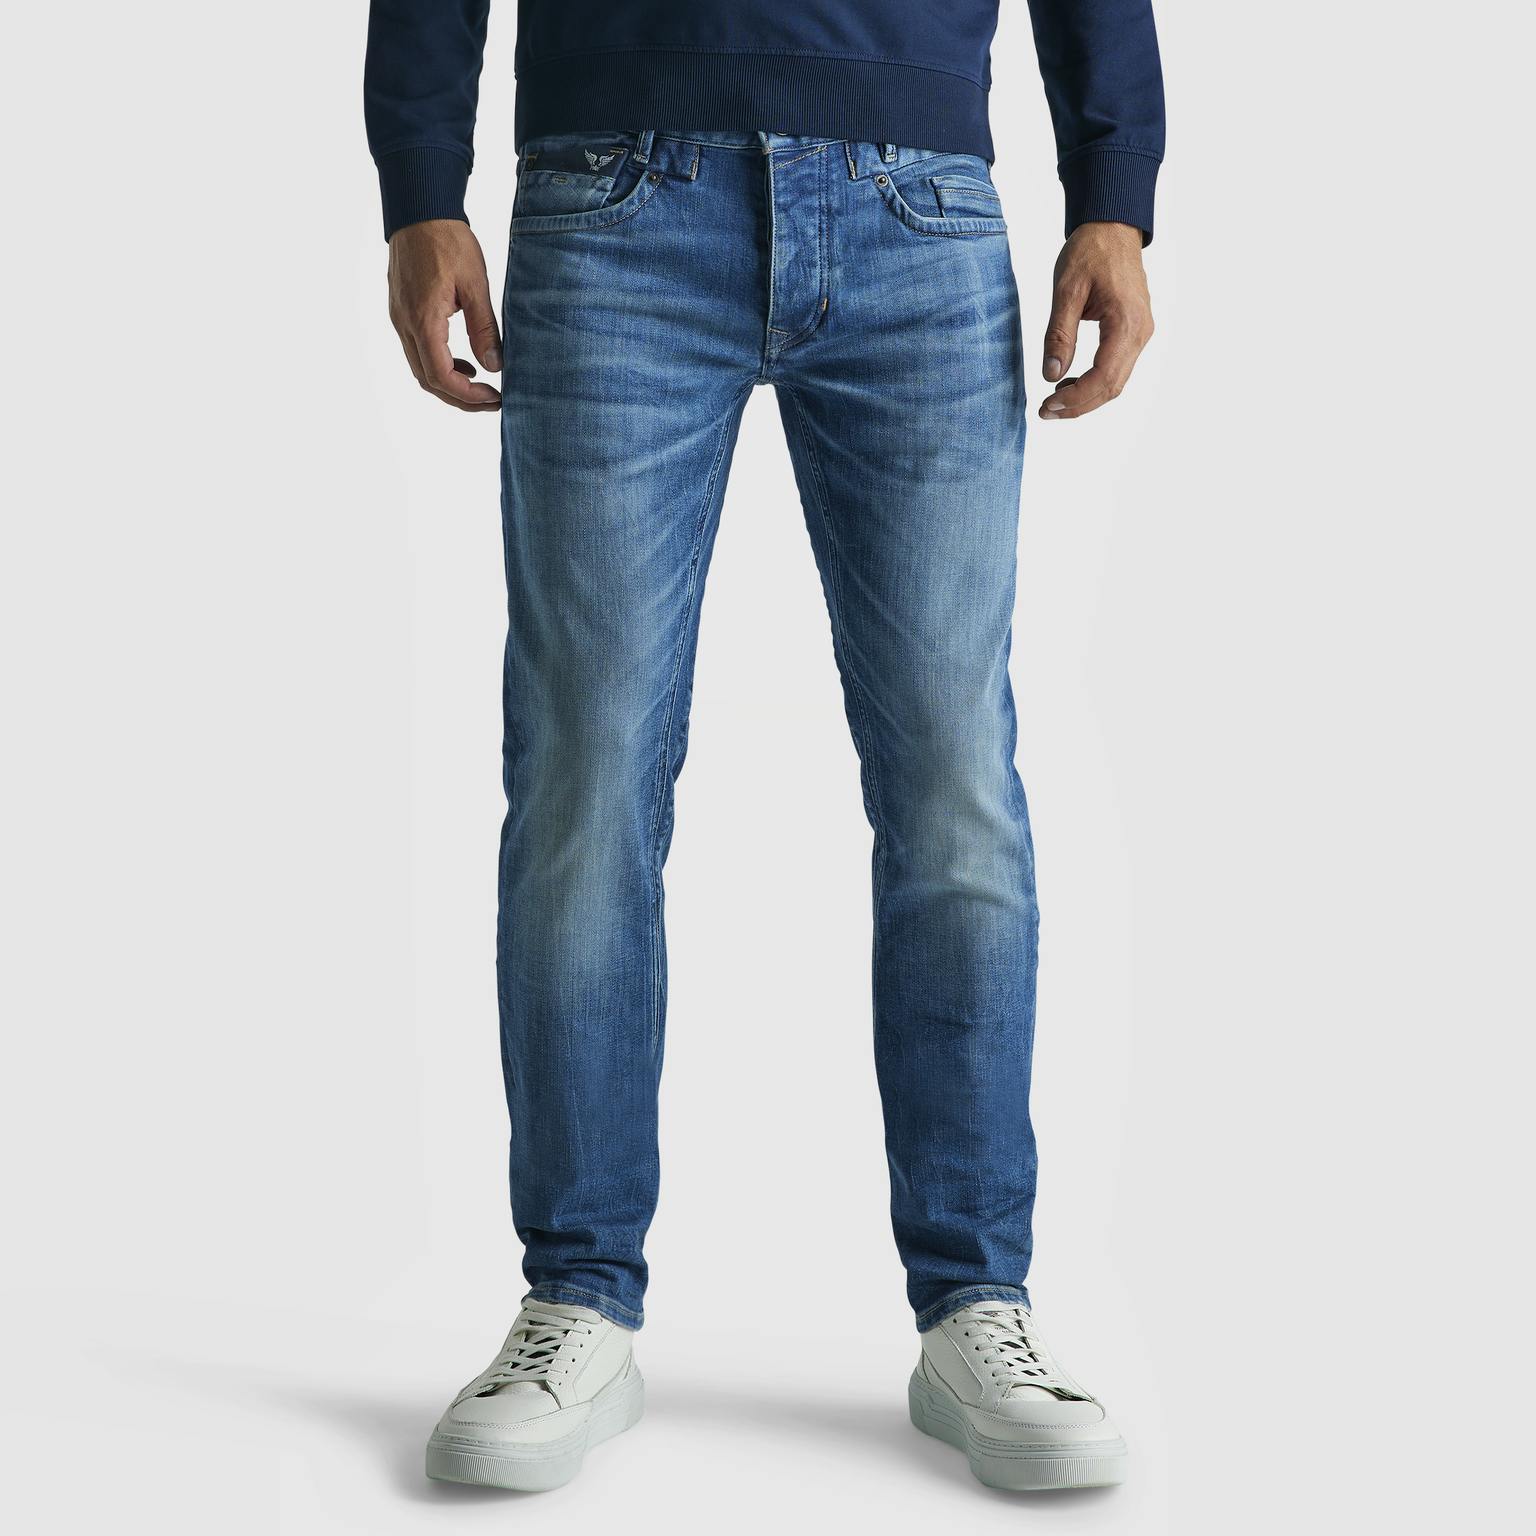 PME LEGEND Jeans Relaxed Fit COMMANDER 3.0 FRESH MID BLUE FMB